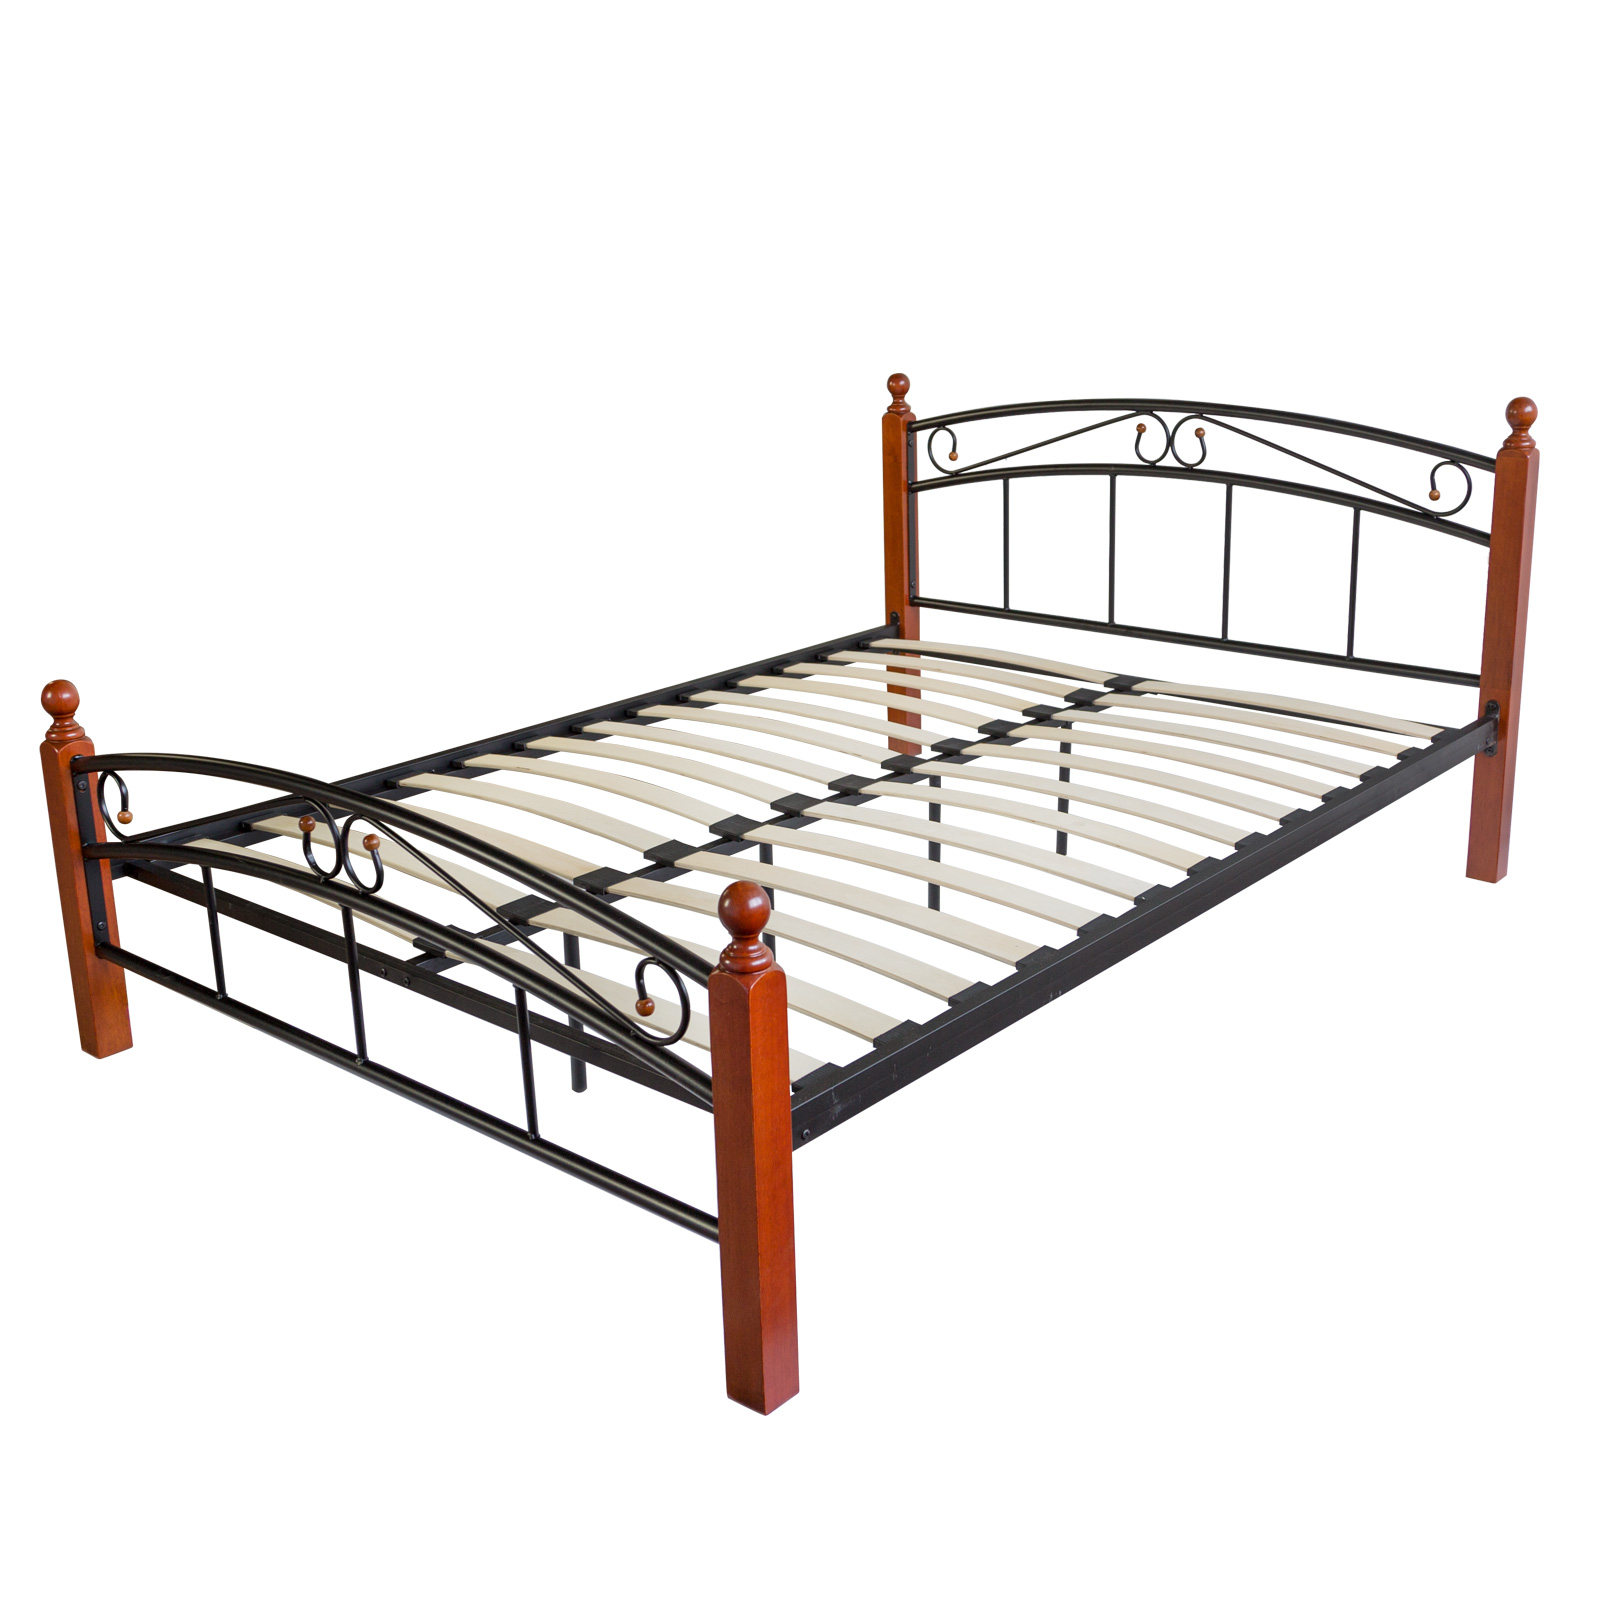 Metal bed 140 160 180 x 200 Bed frame with slatted frame Double Bed Wood Black Brown